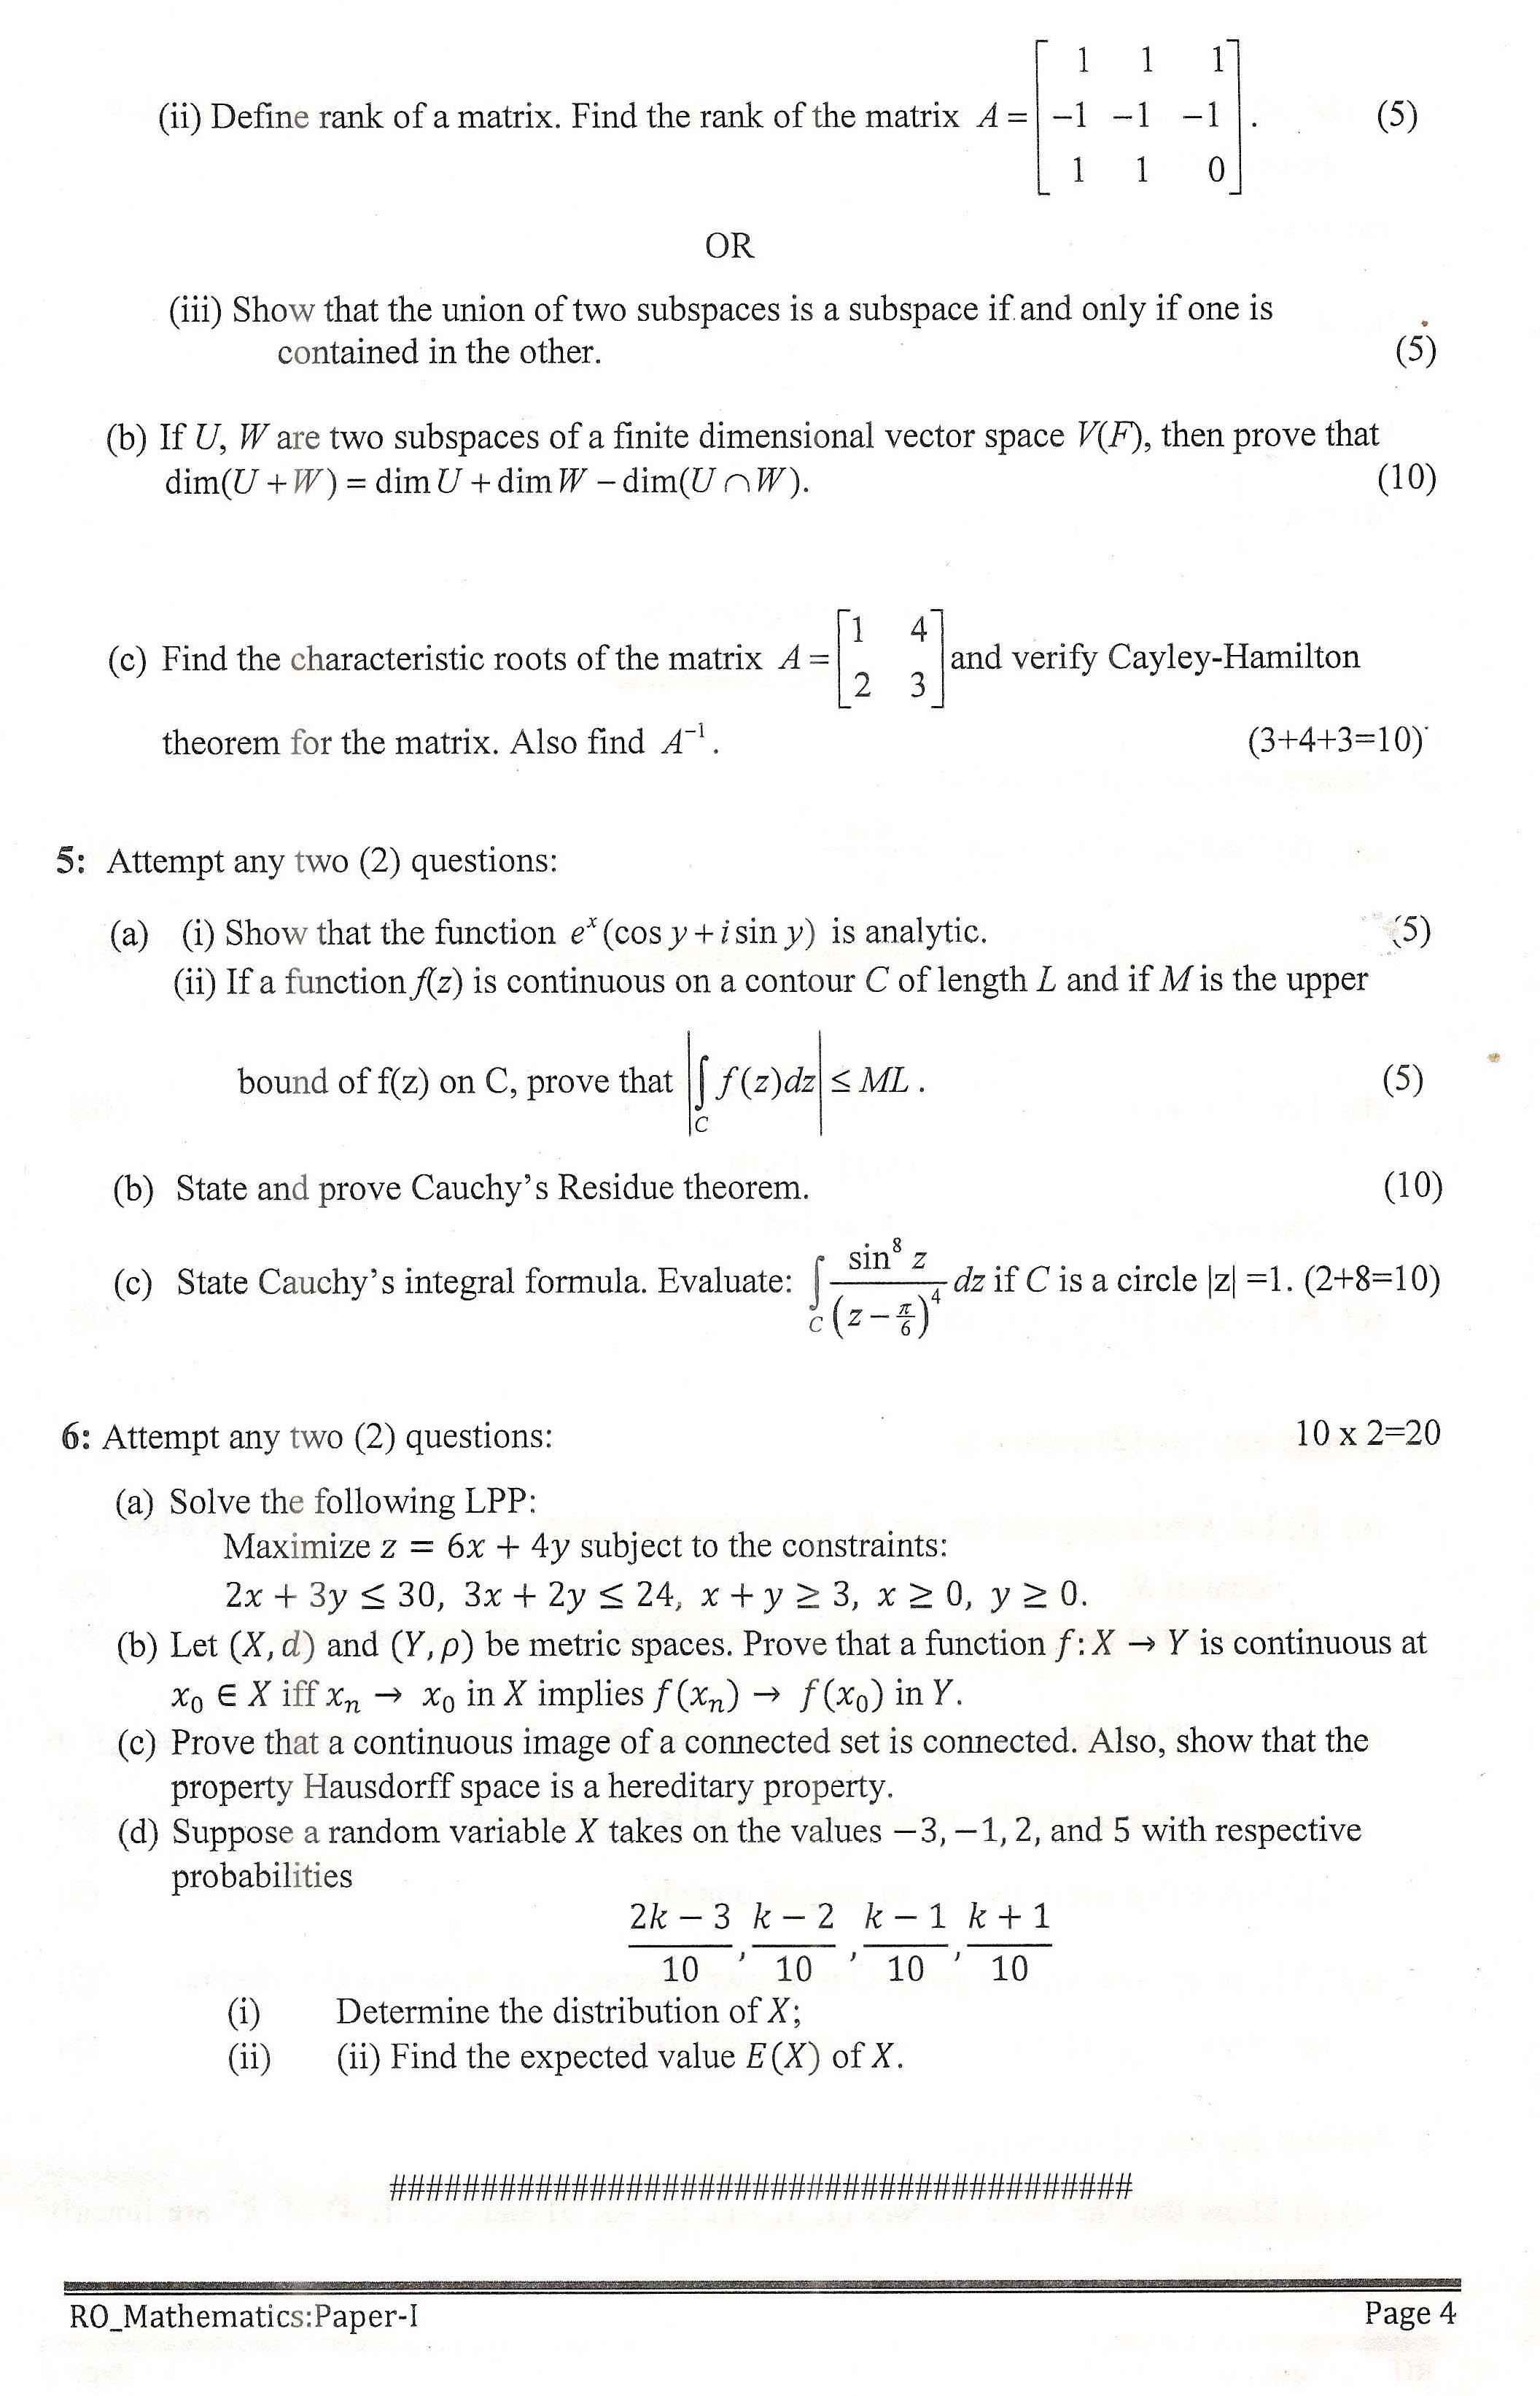 APPSC Research Officer Mathematics Paper I Exam Question Paper 2014 4